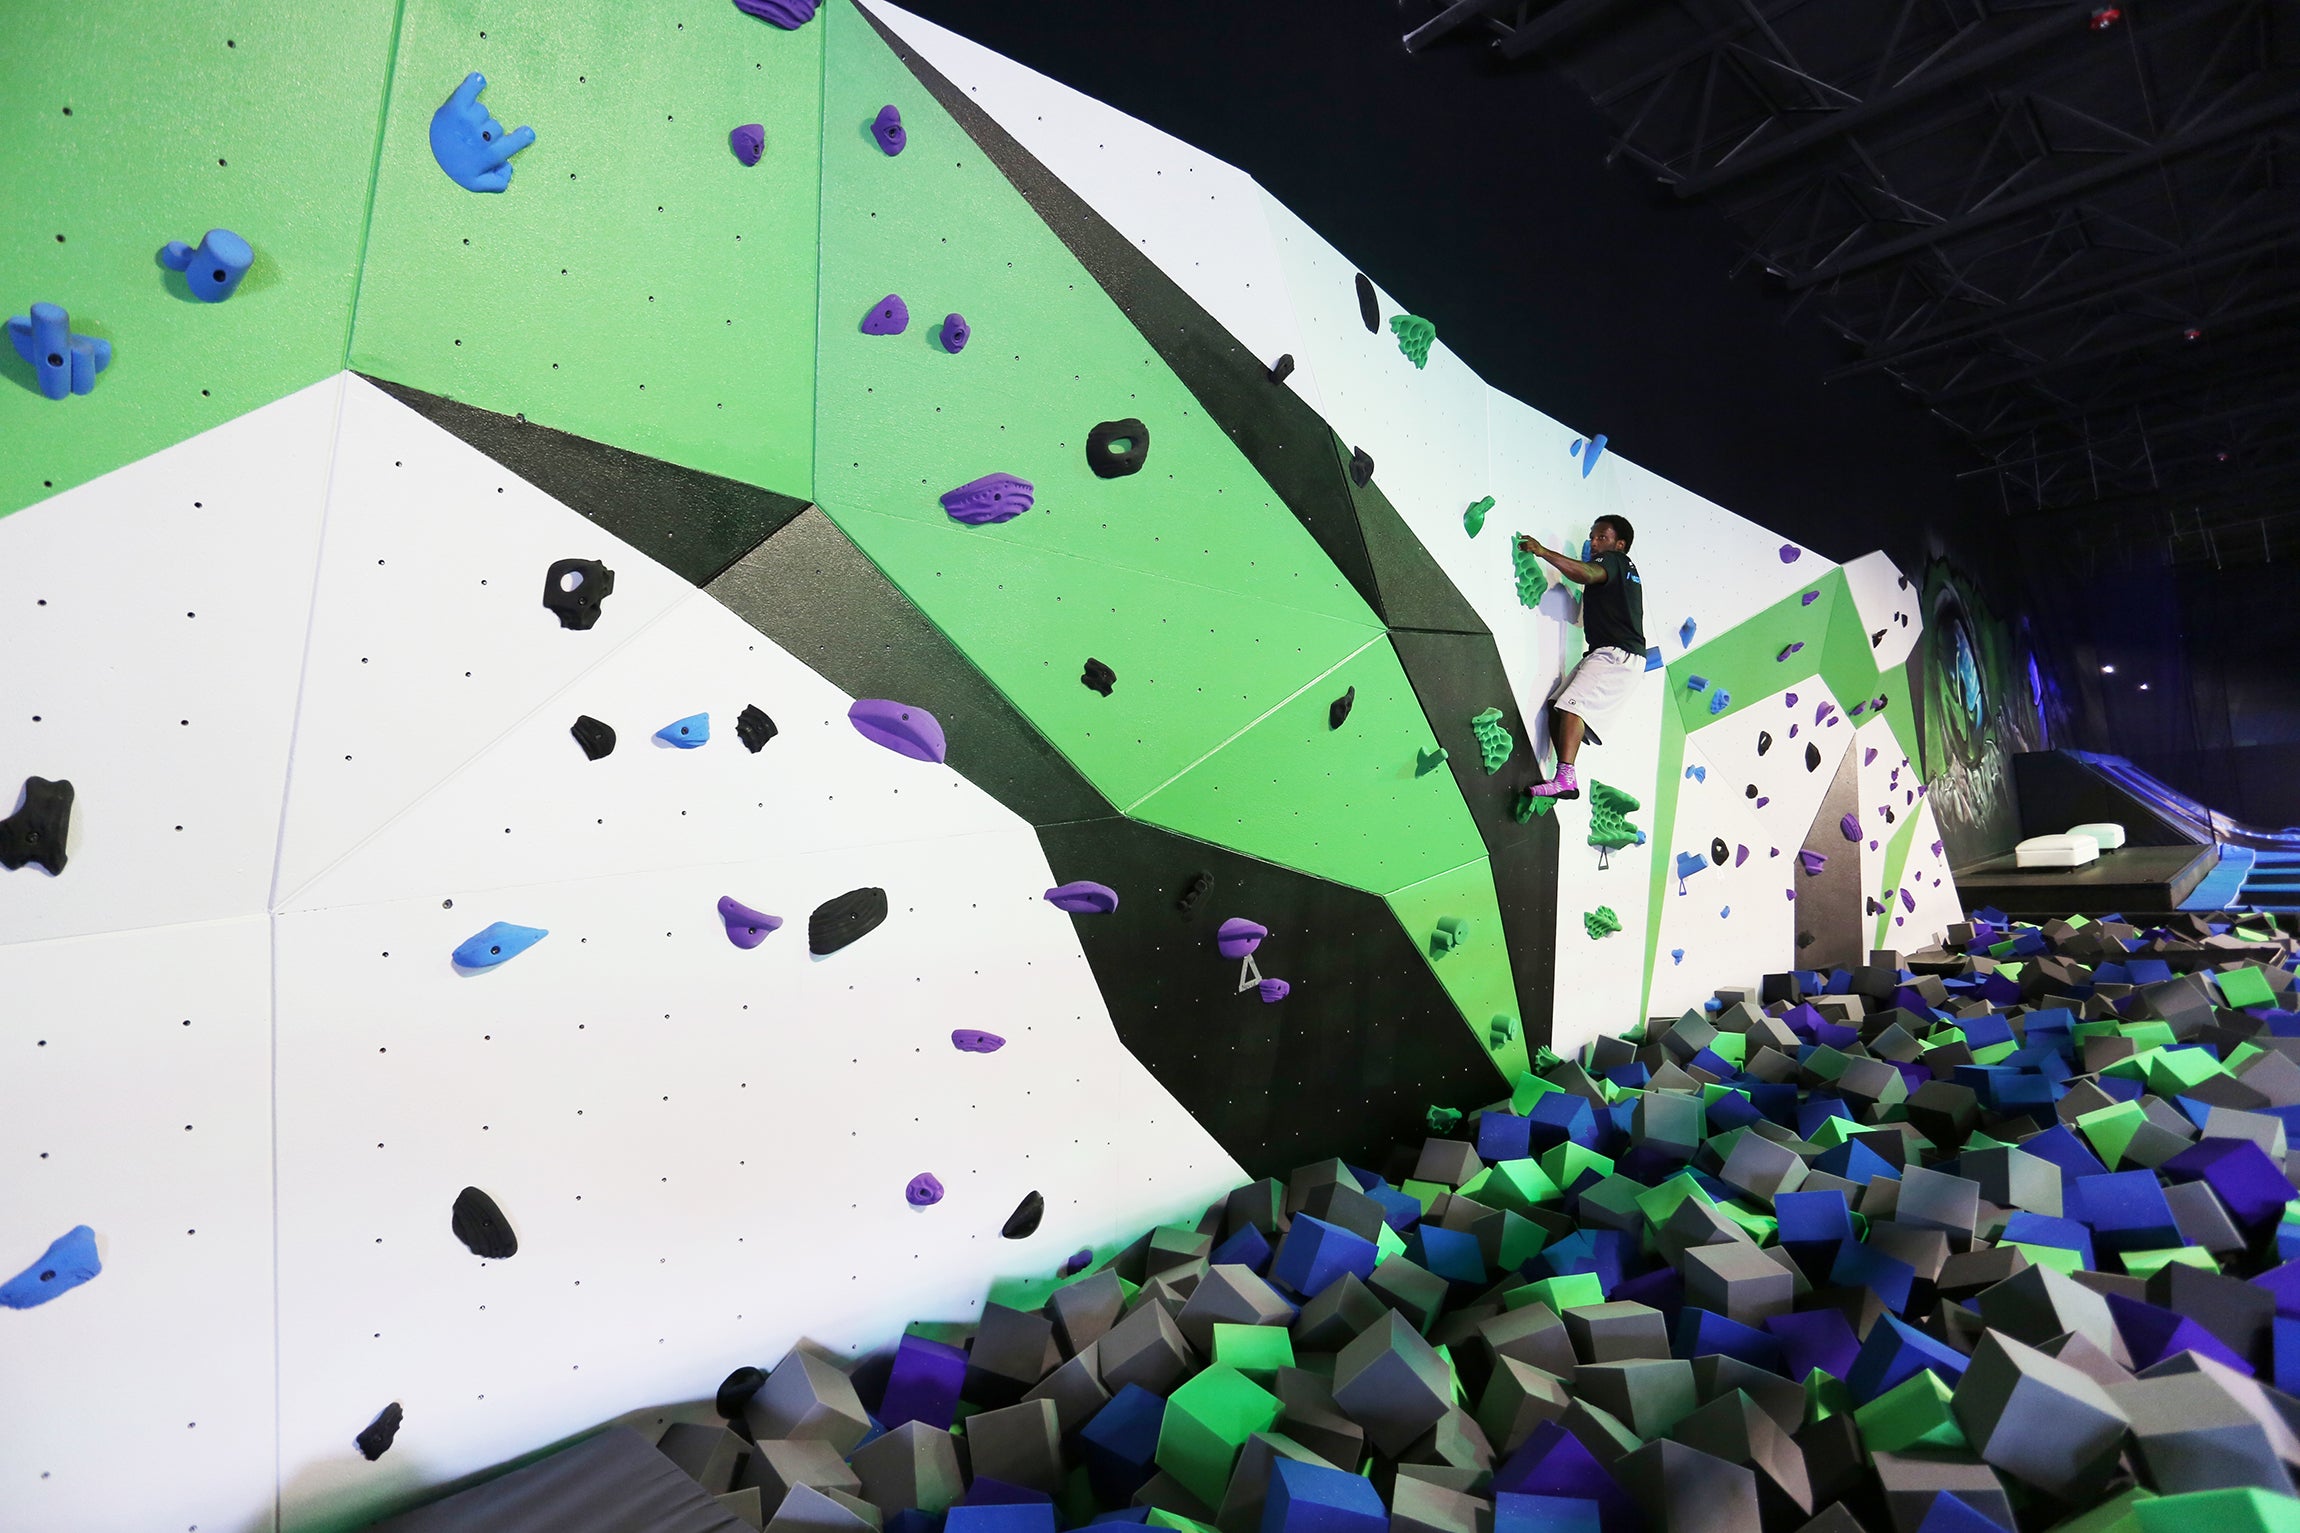 Man tries sport climbing on a bouldering wall in a trampoline park